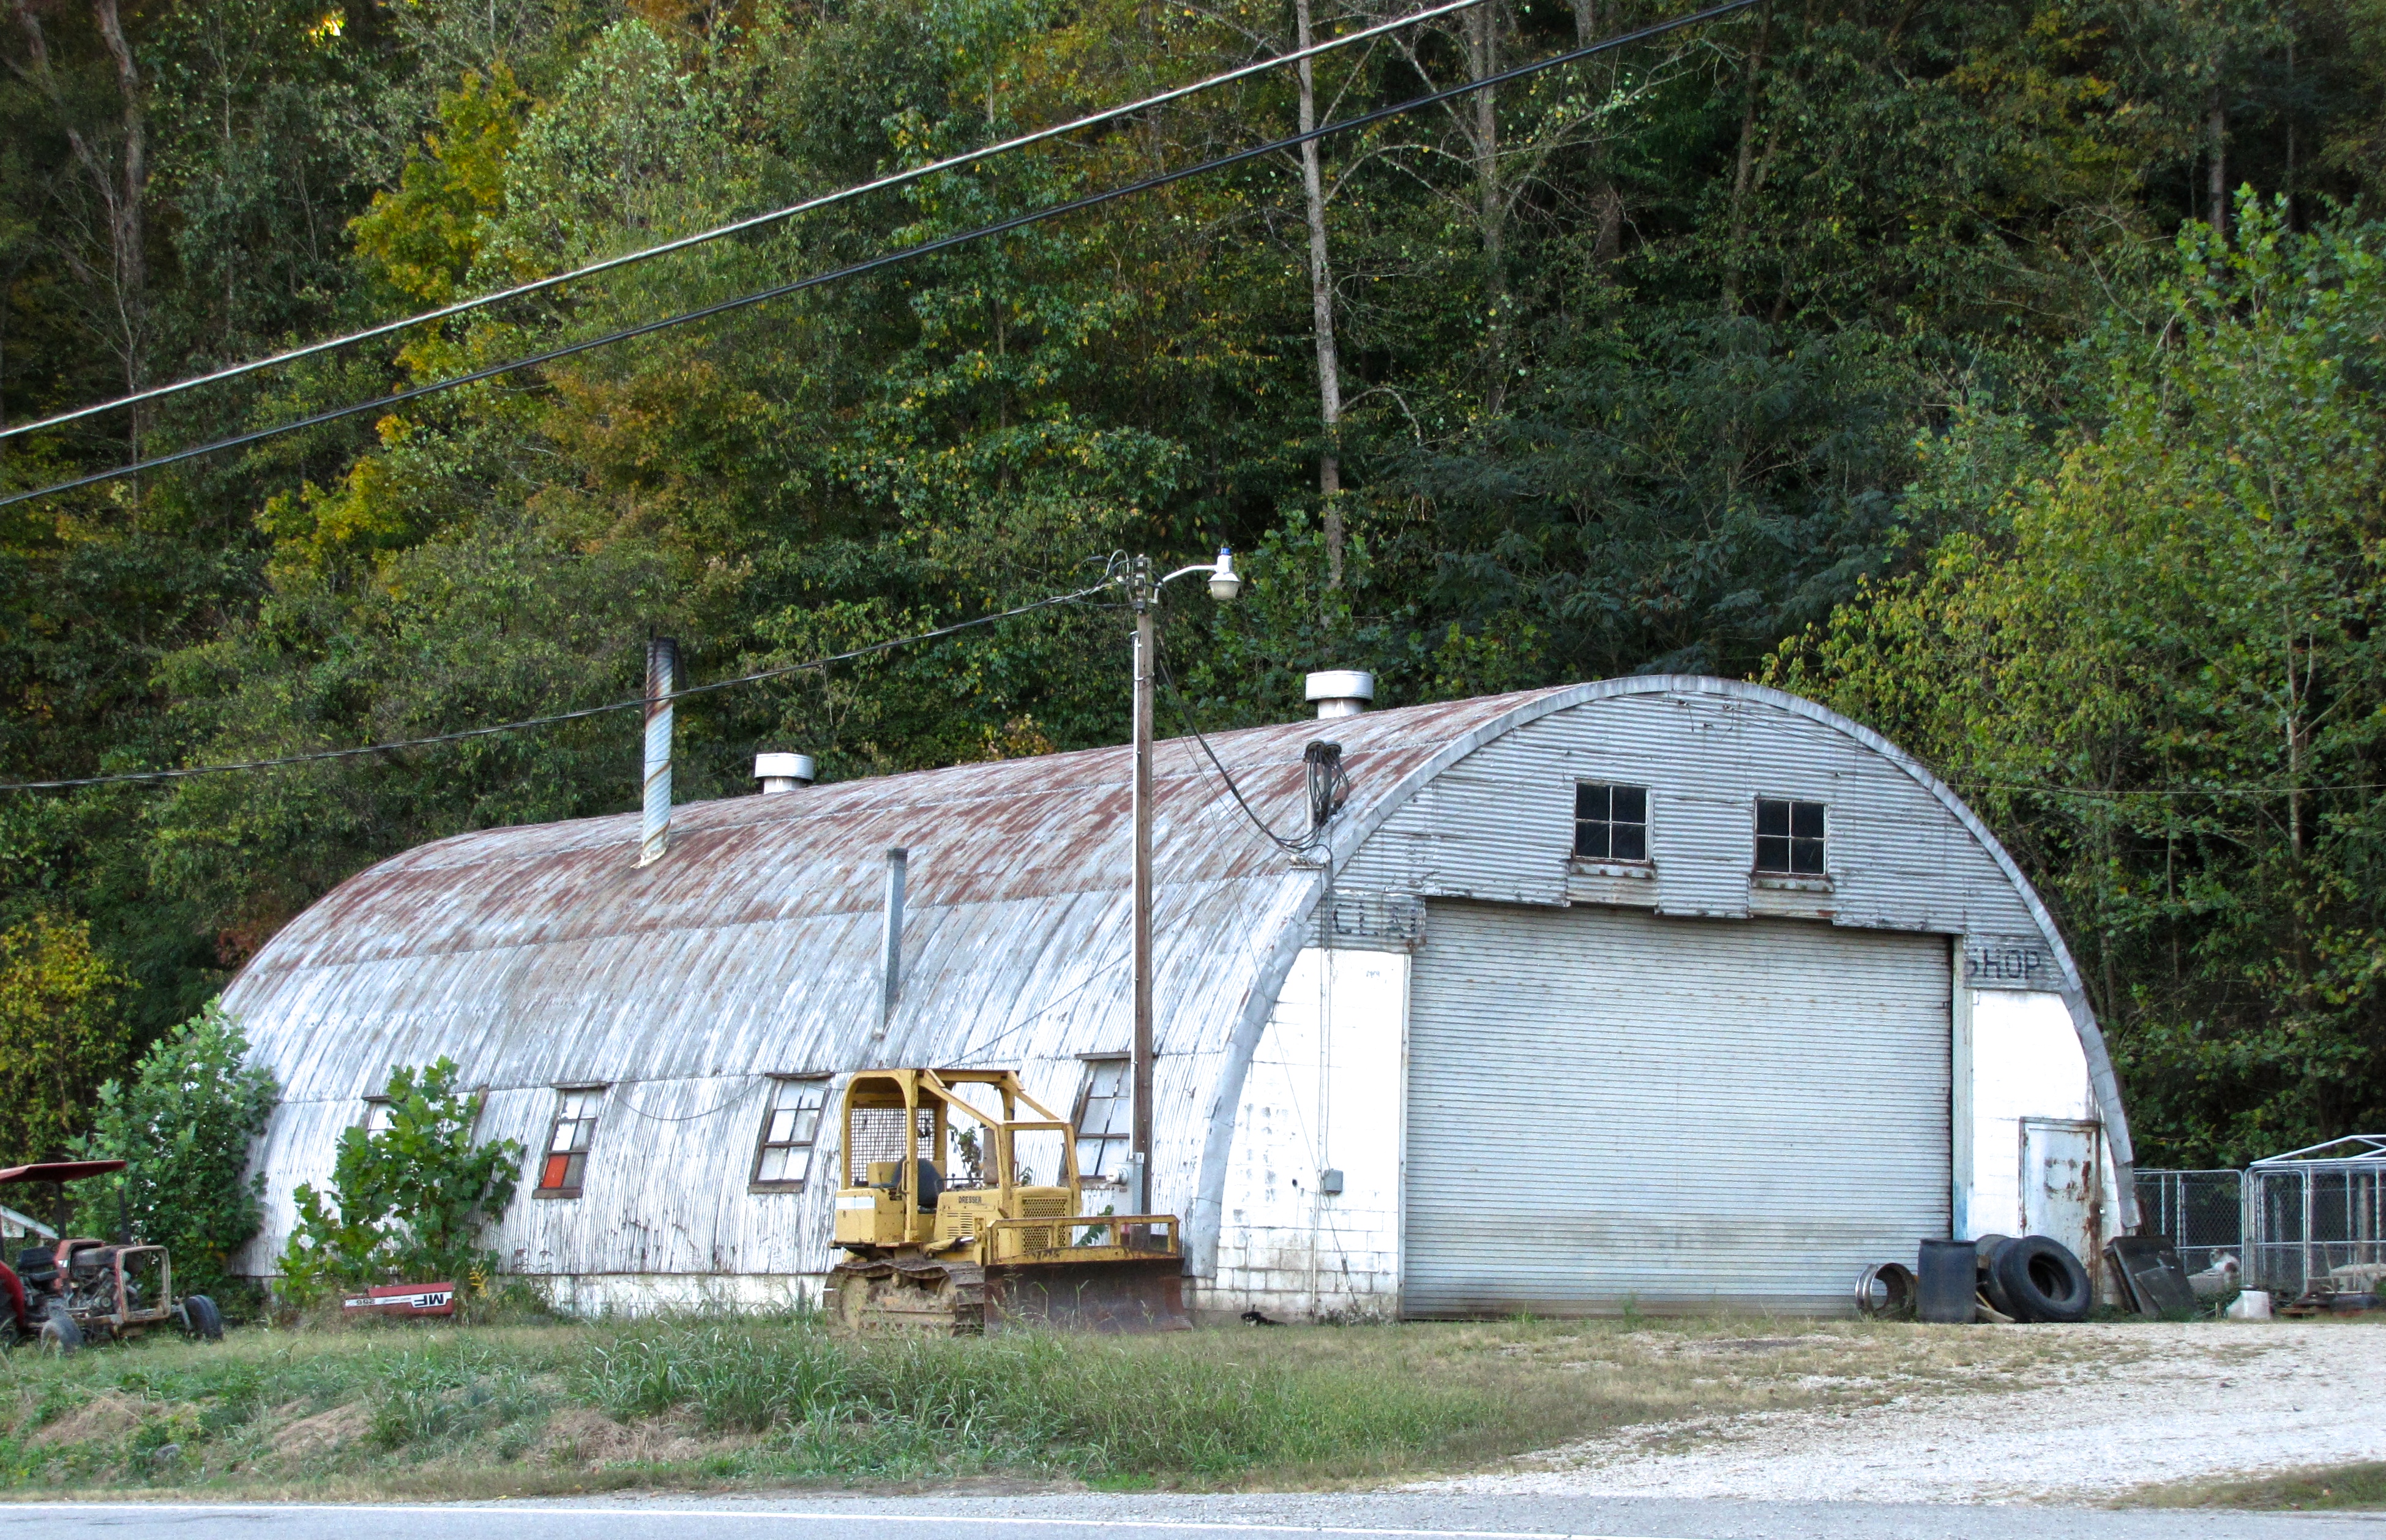 quonset hut in Richland, MS